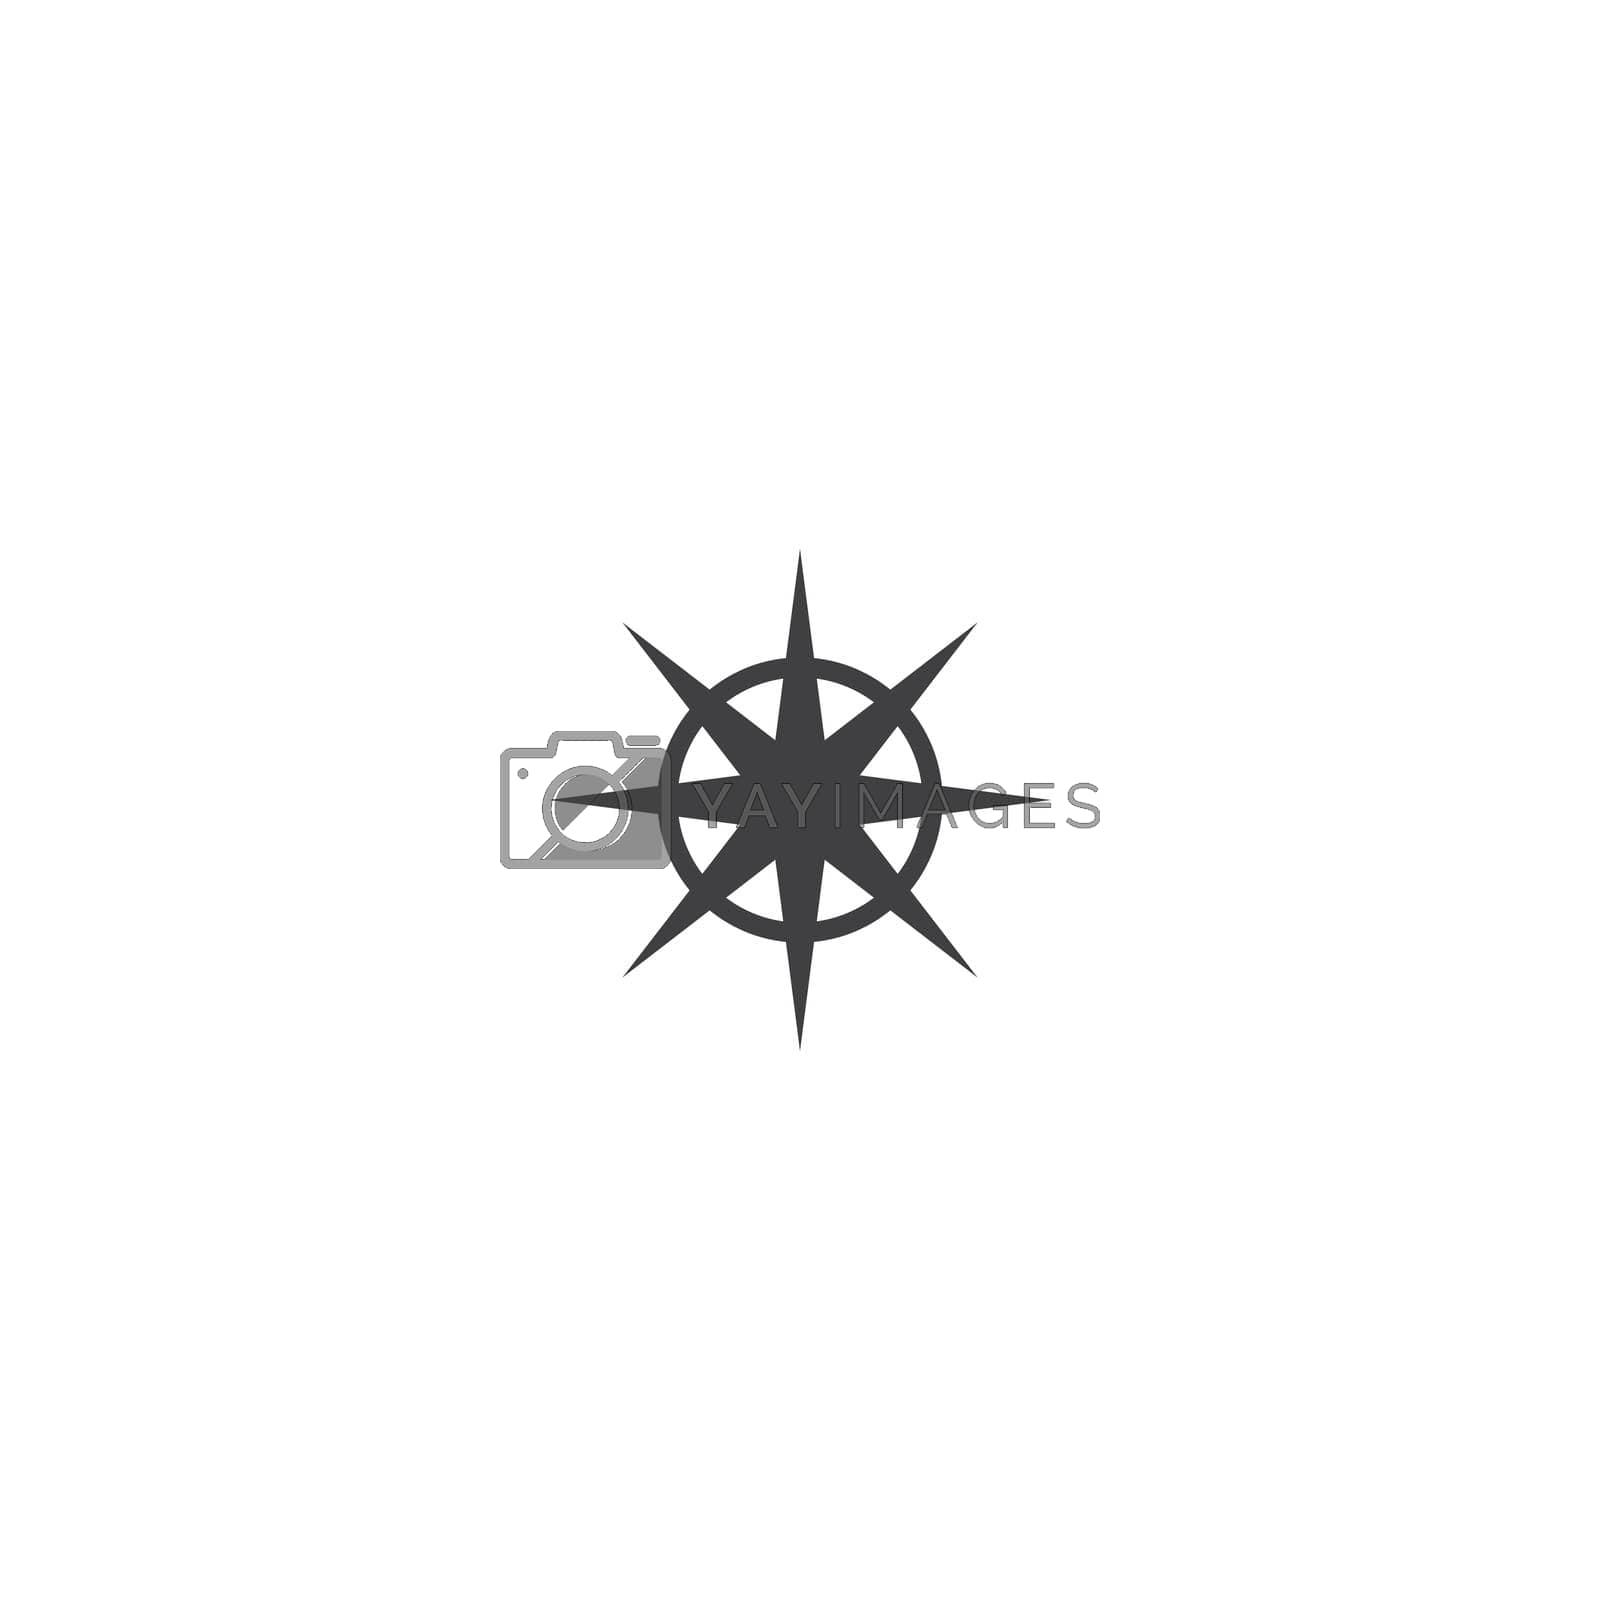 Royalty free image of Compass Logo by awk